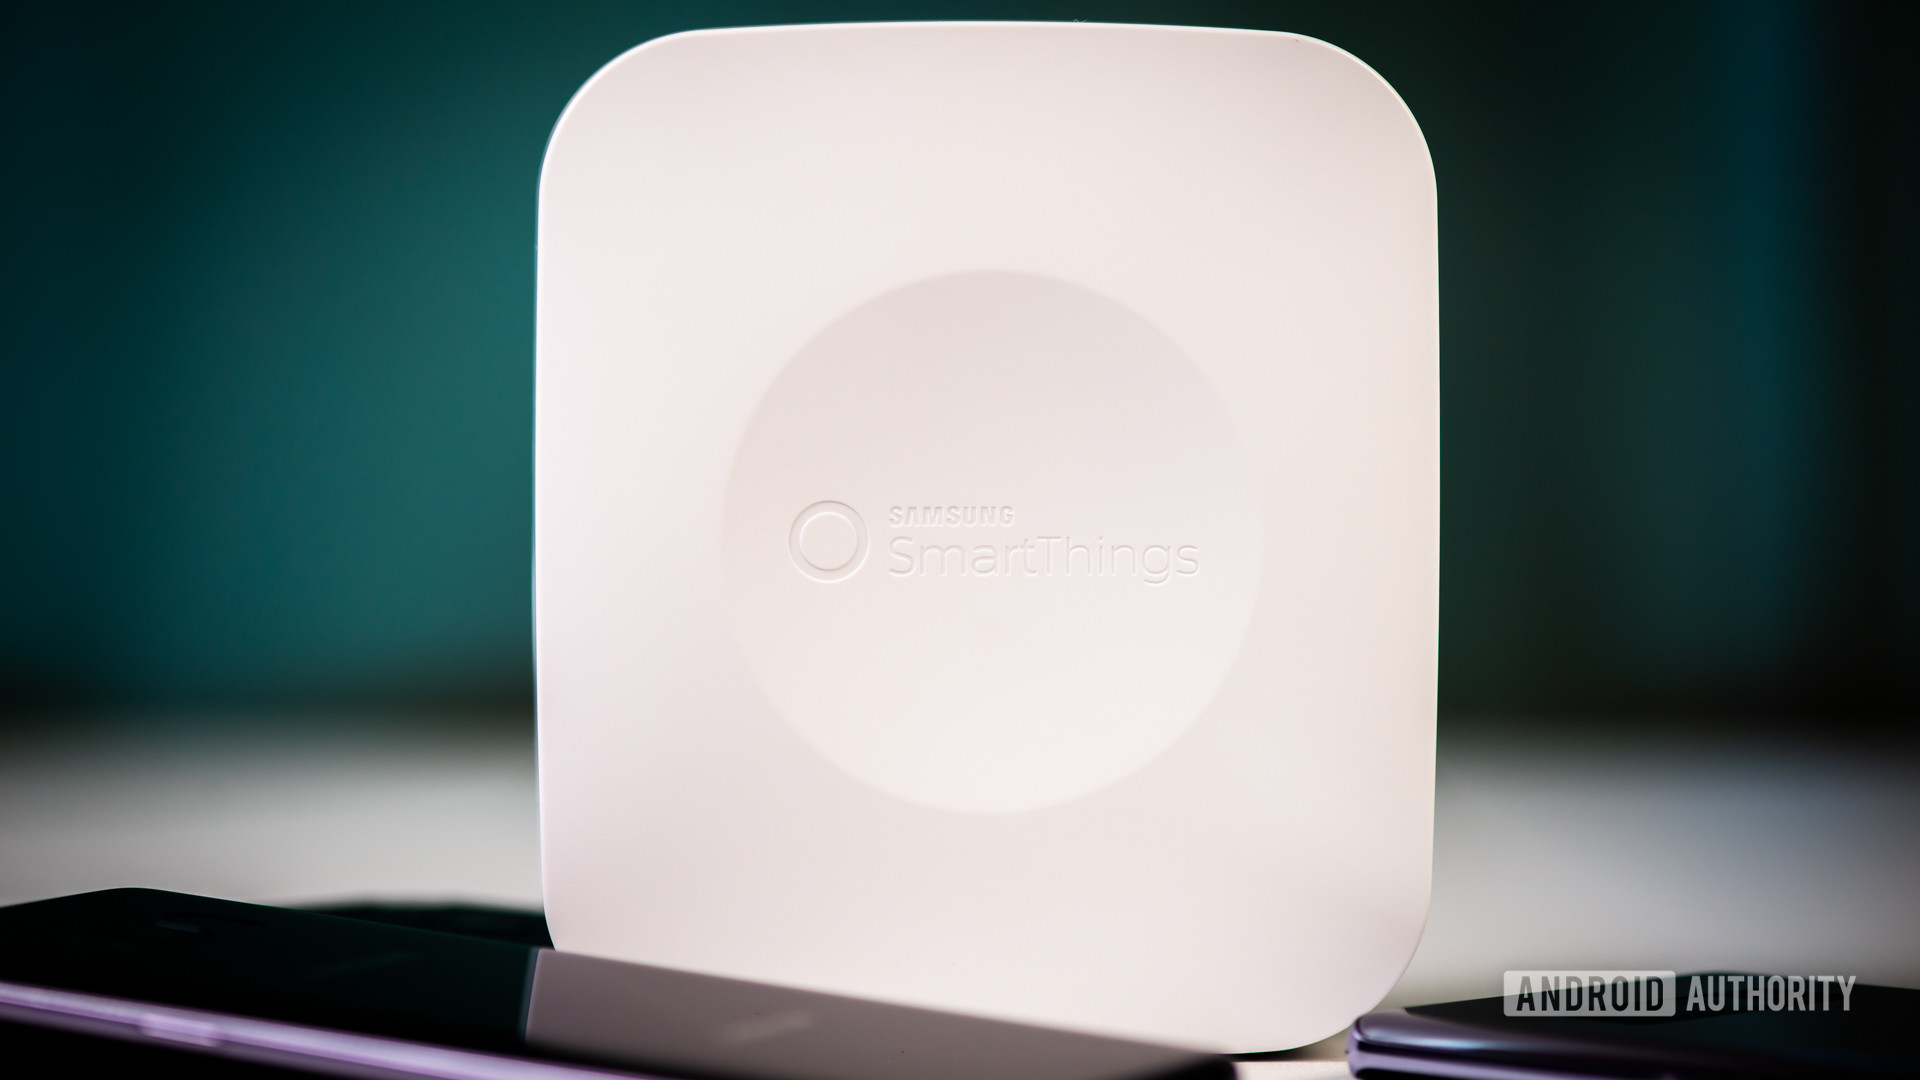 Samsung SmartThings for smart home